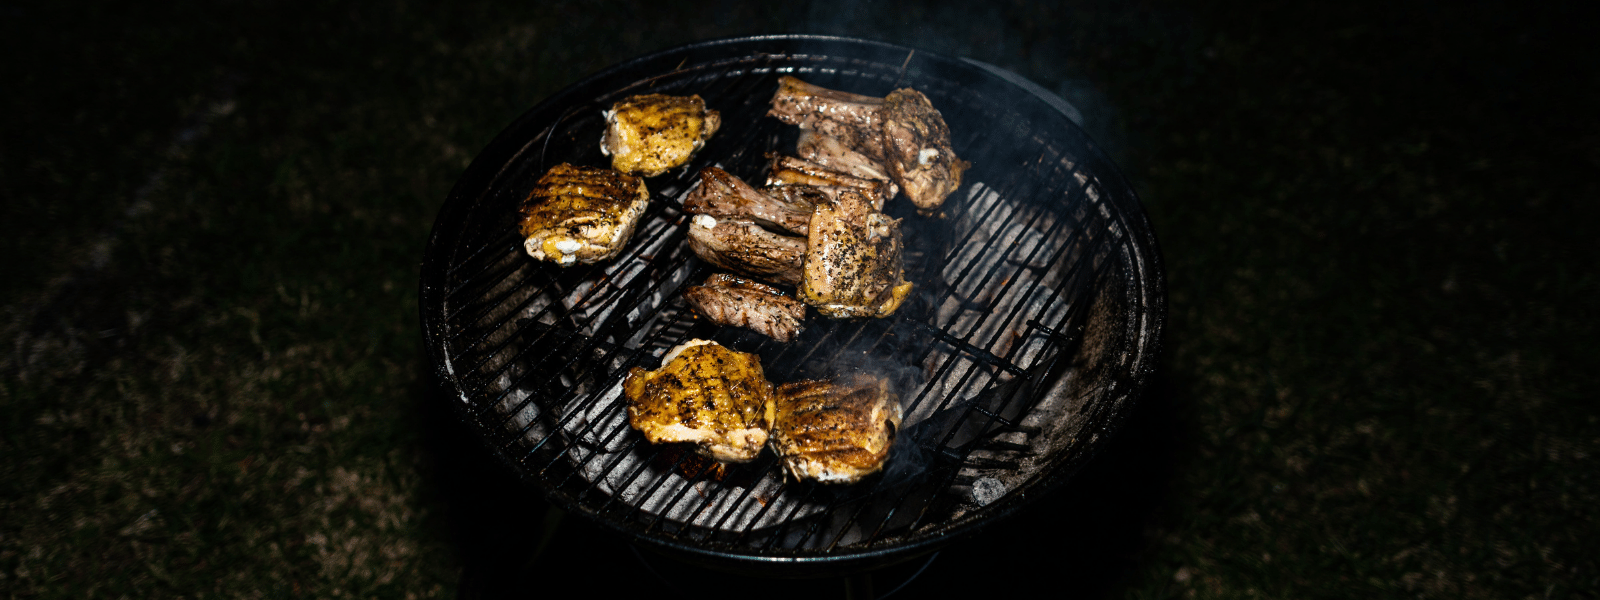 It's BBQ Season! 5 Ways to Wow them at your next <i>"Meating"</i> - Halswell Butchery